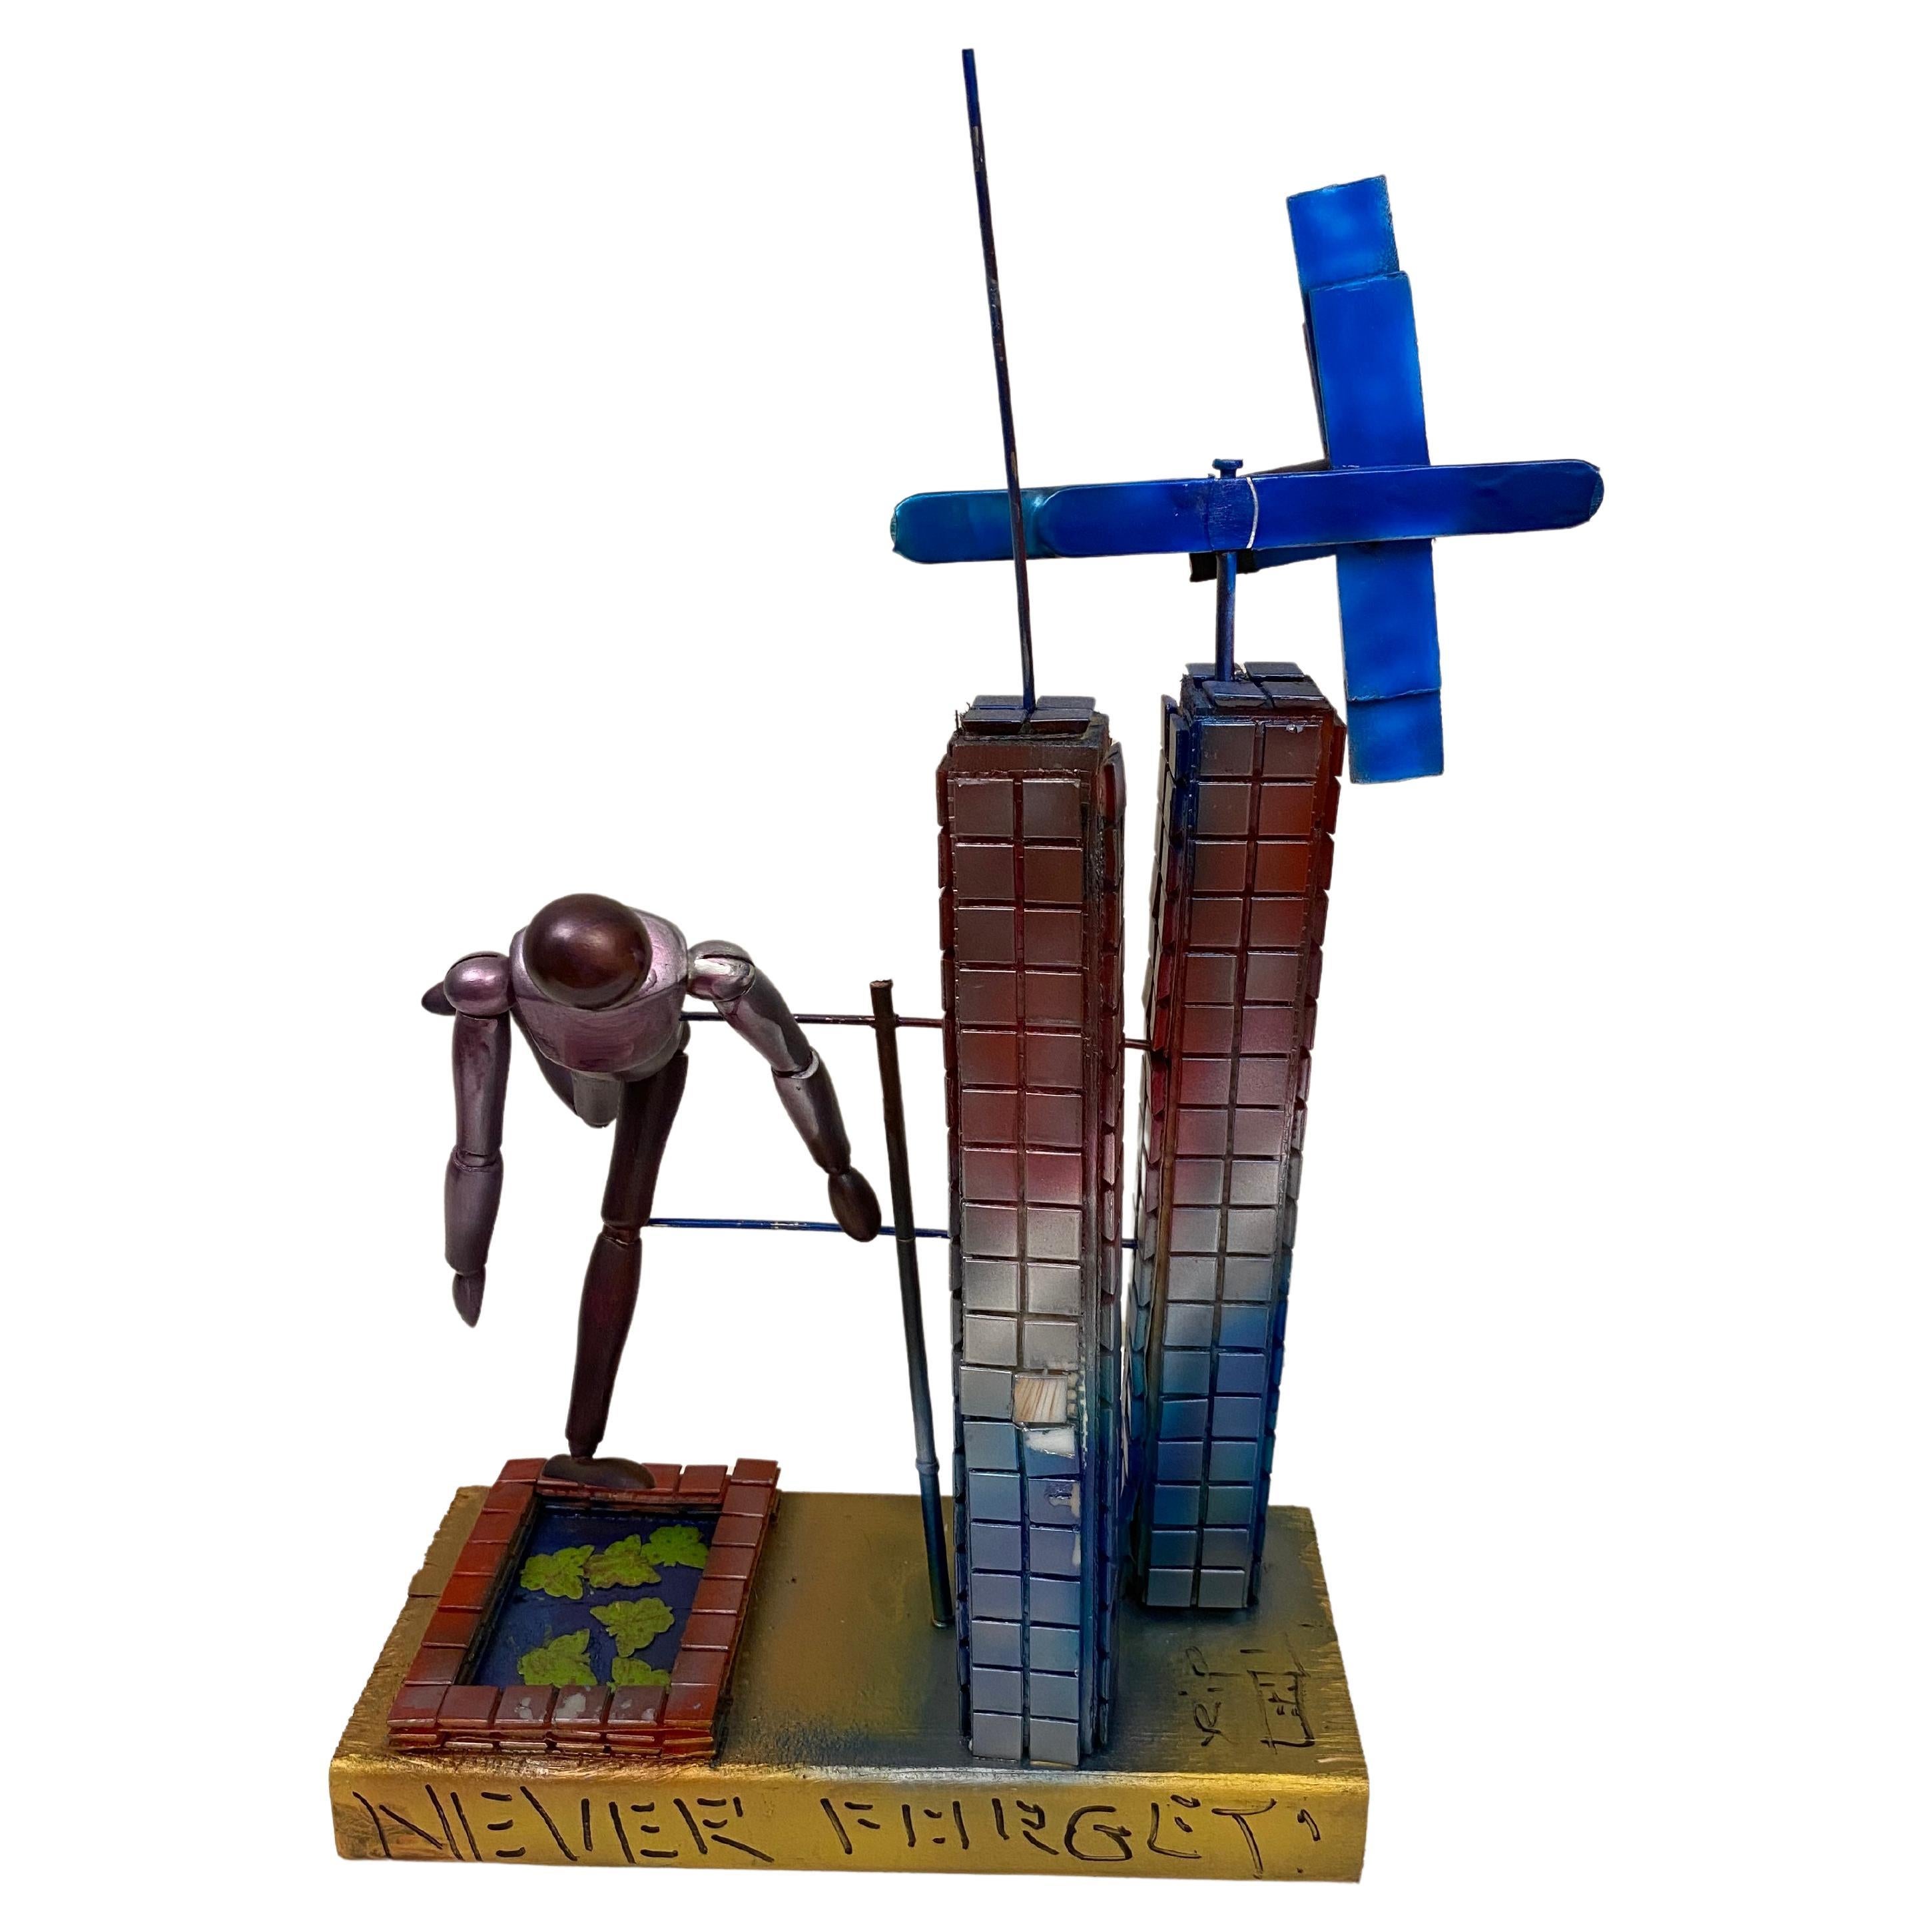 Modernist Wood Sculpture Dedicated to 911 Titled "Never Forget", Signed For Sale